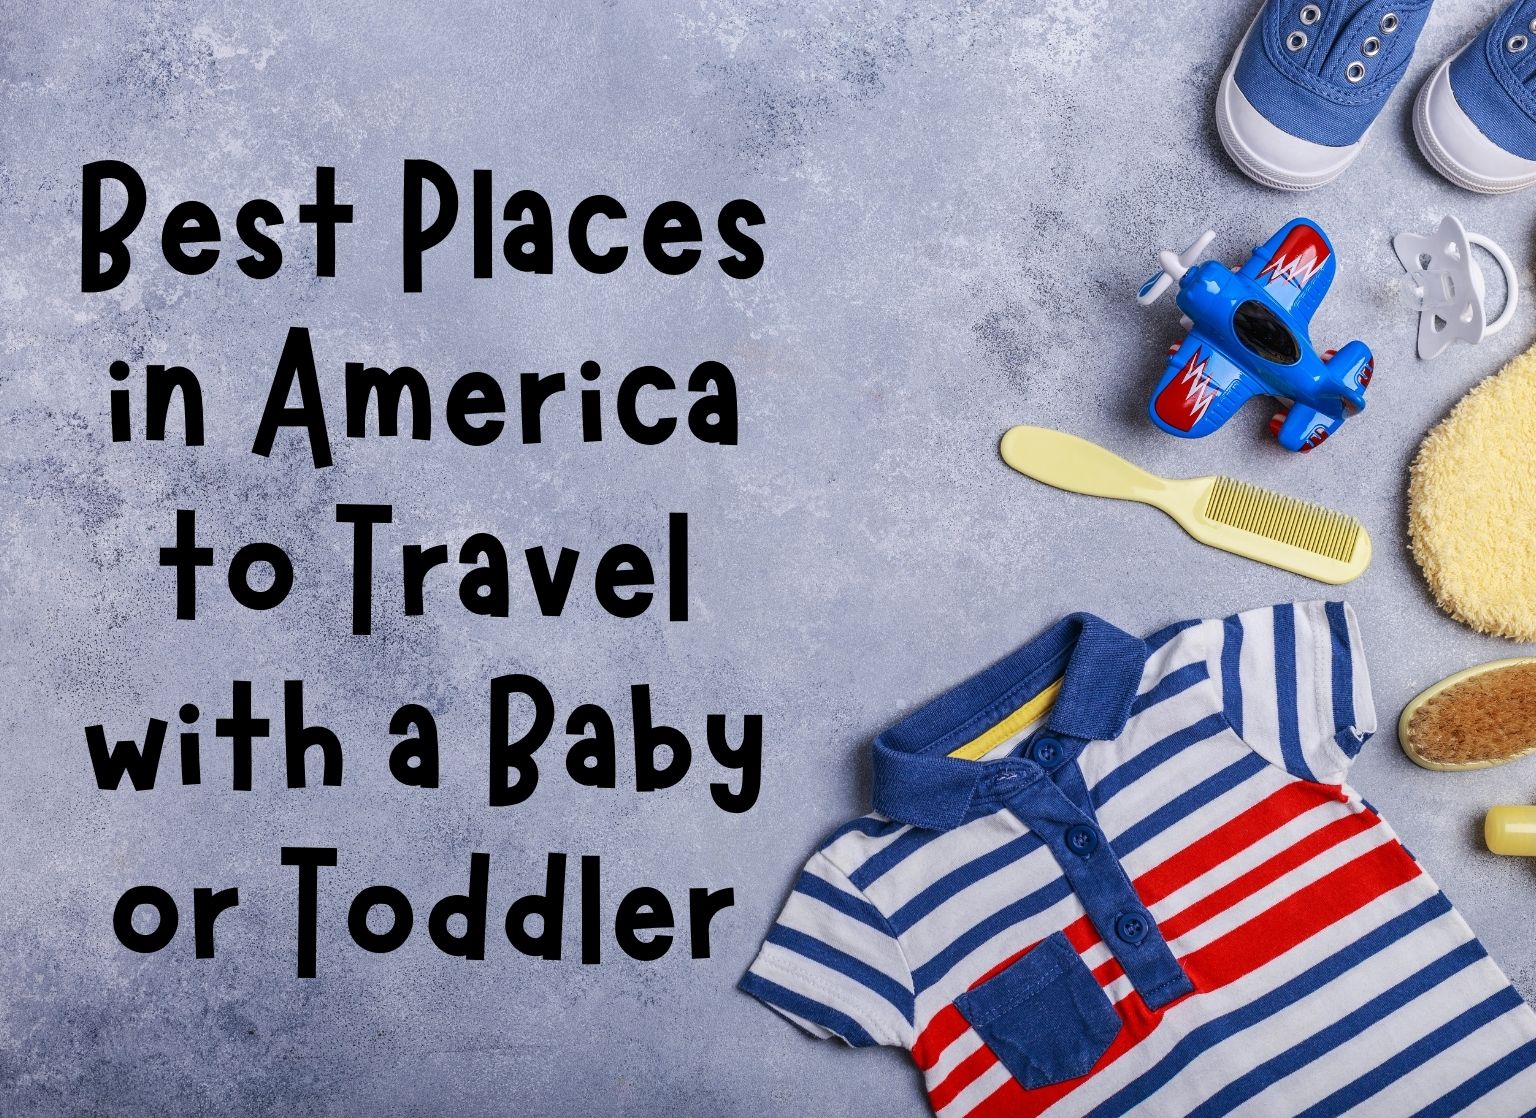 Best Places in America to Travel with a Baby or Toddler - title